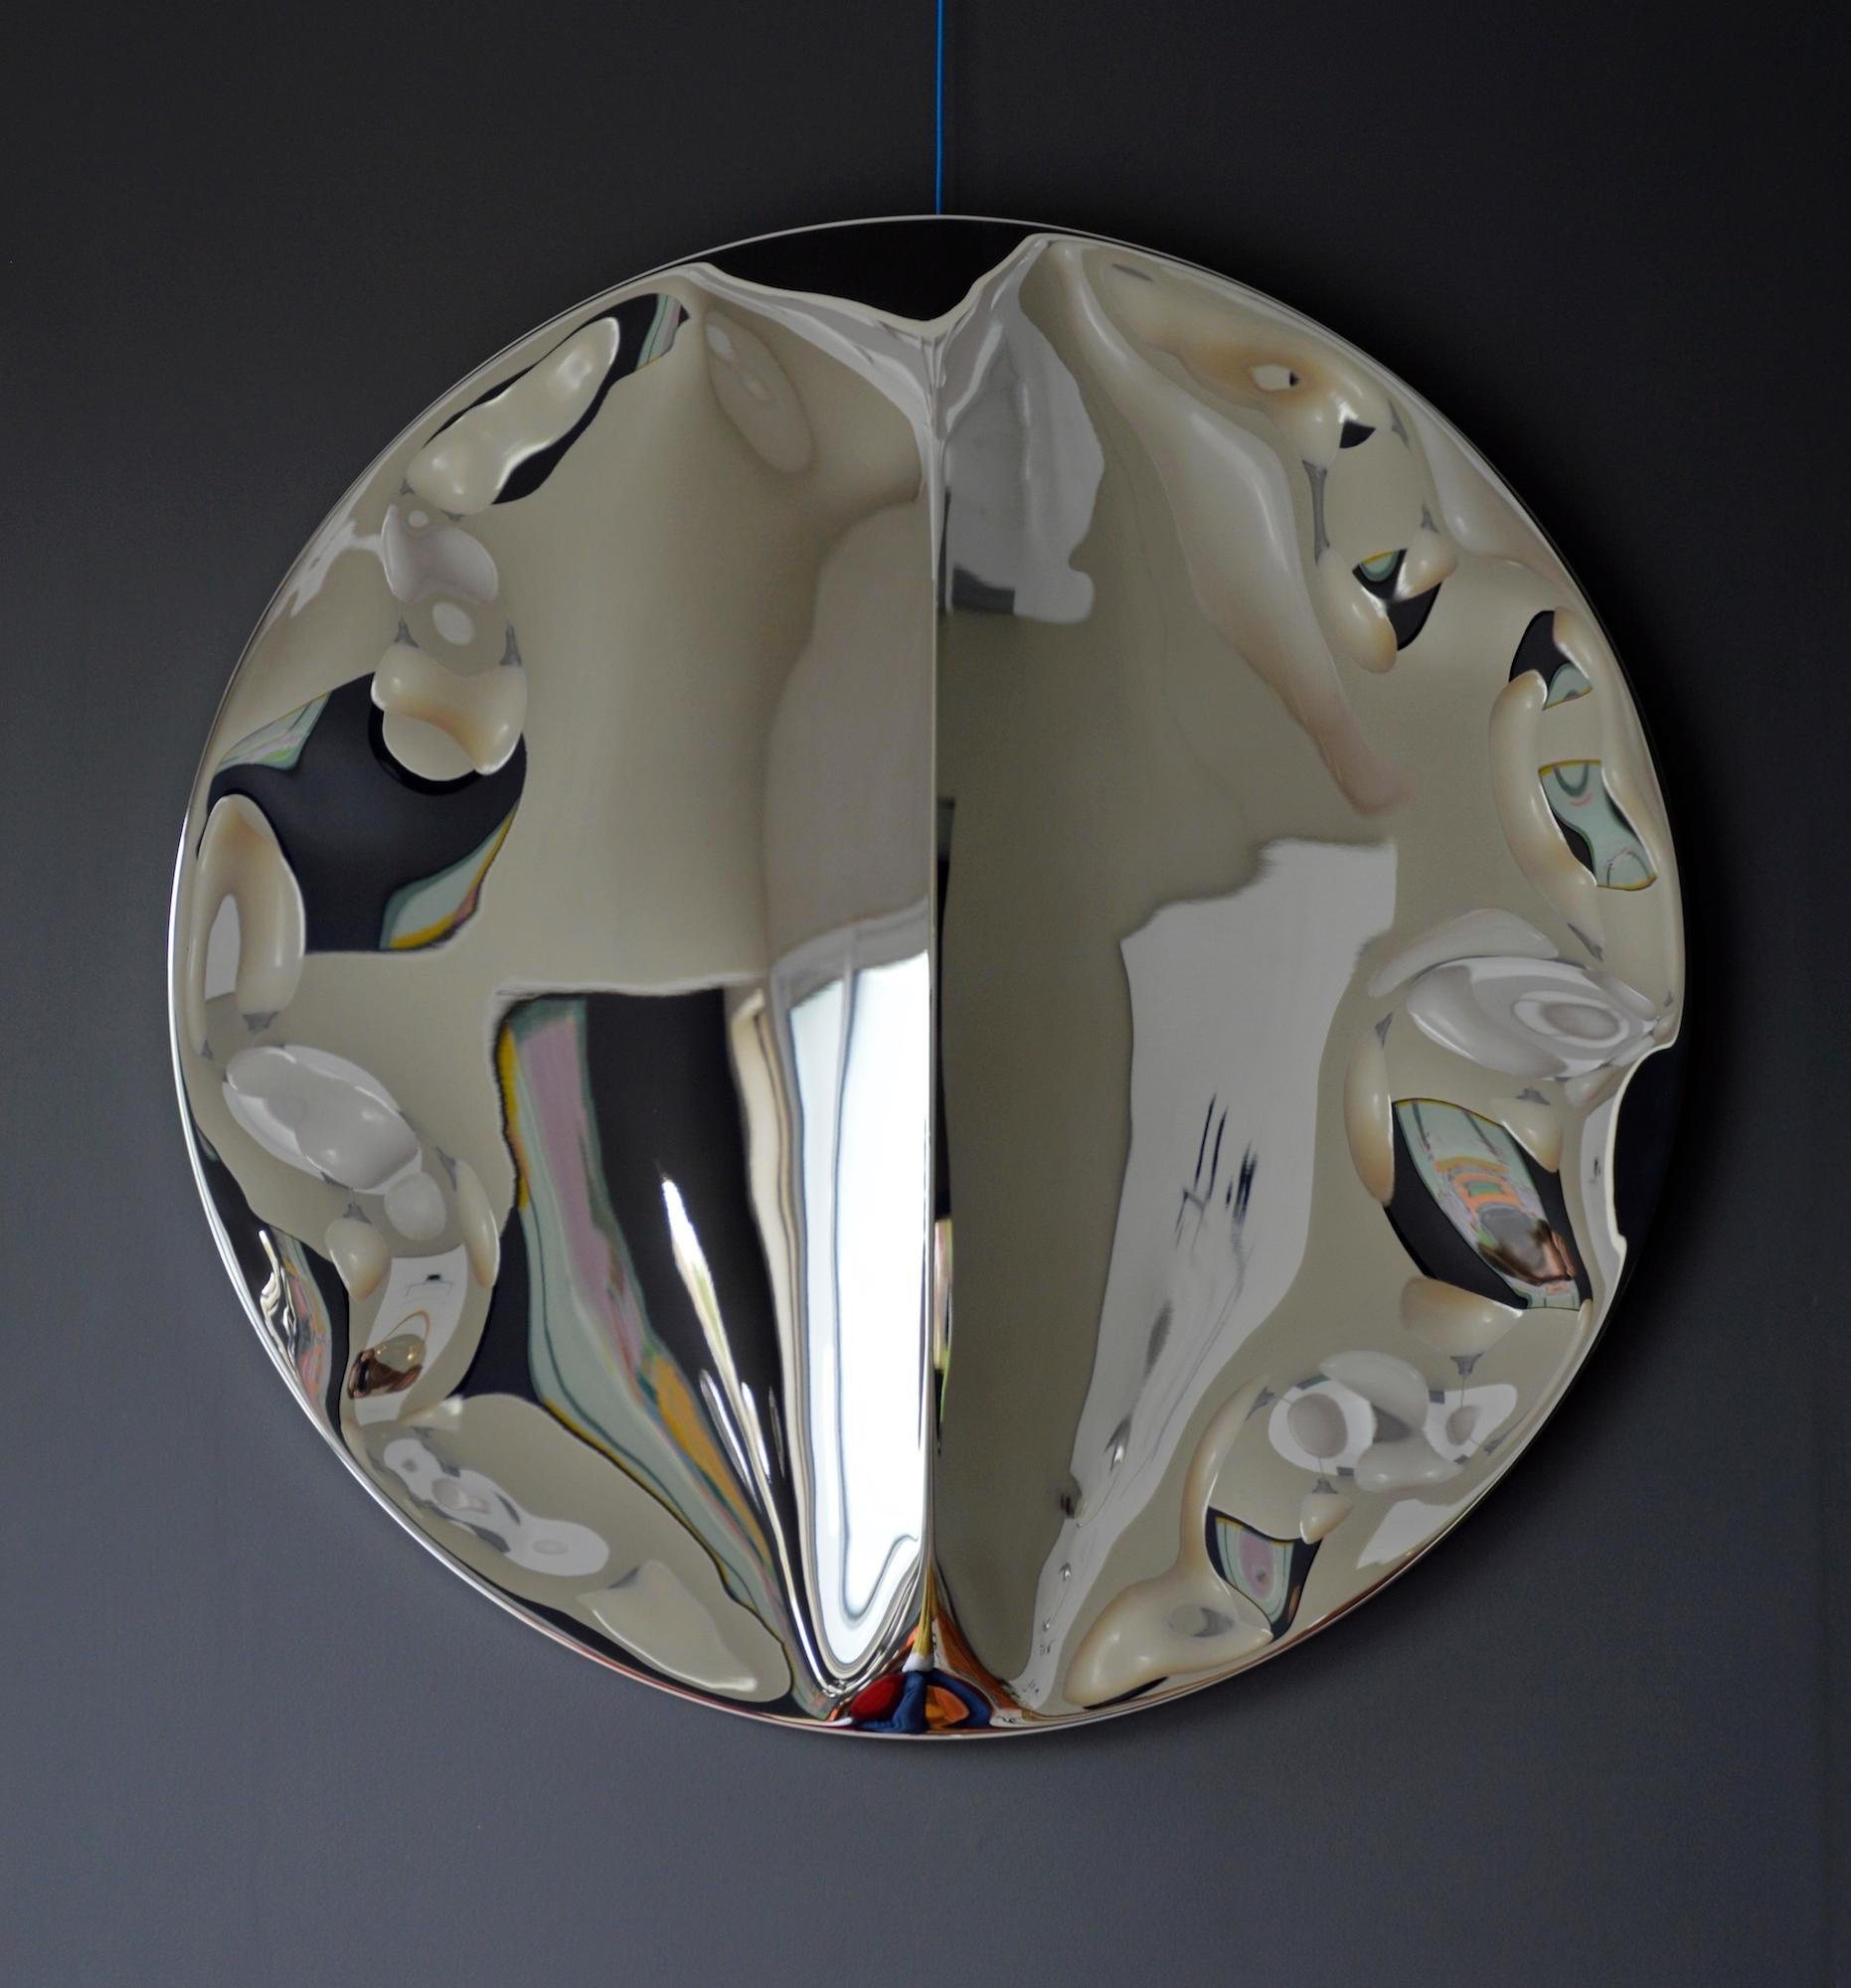 Wall mirror “with fold” I by Franck K - Stainless steel sculpture, reflection